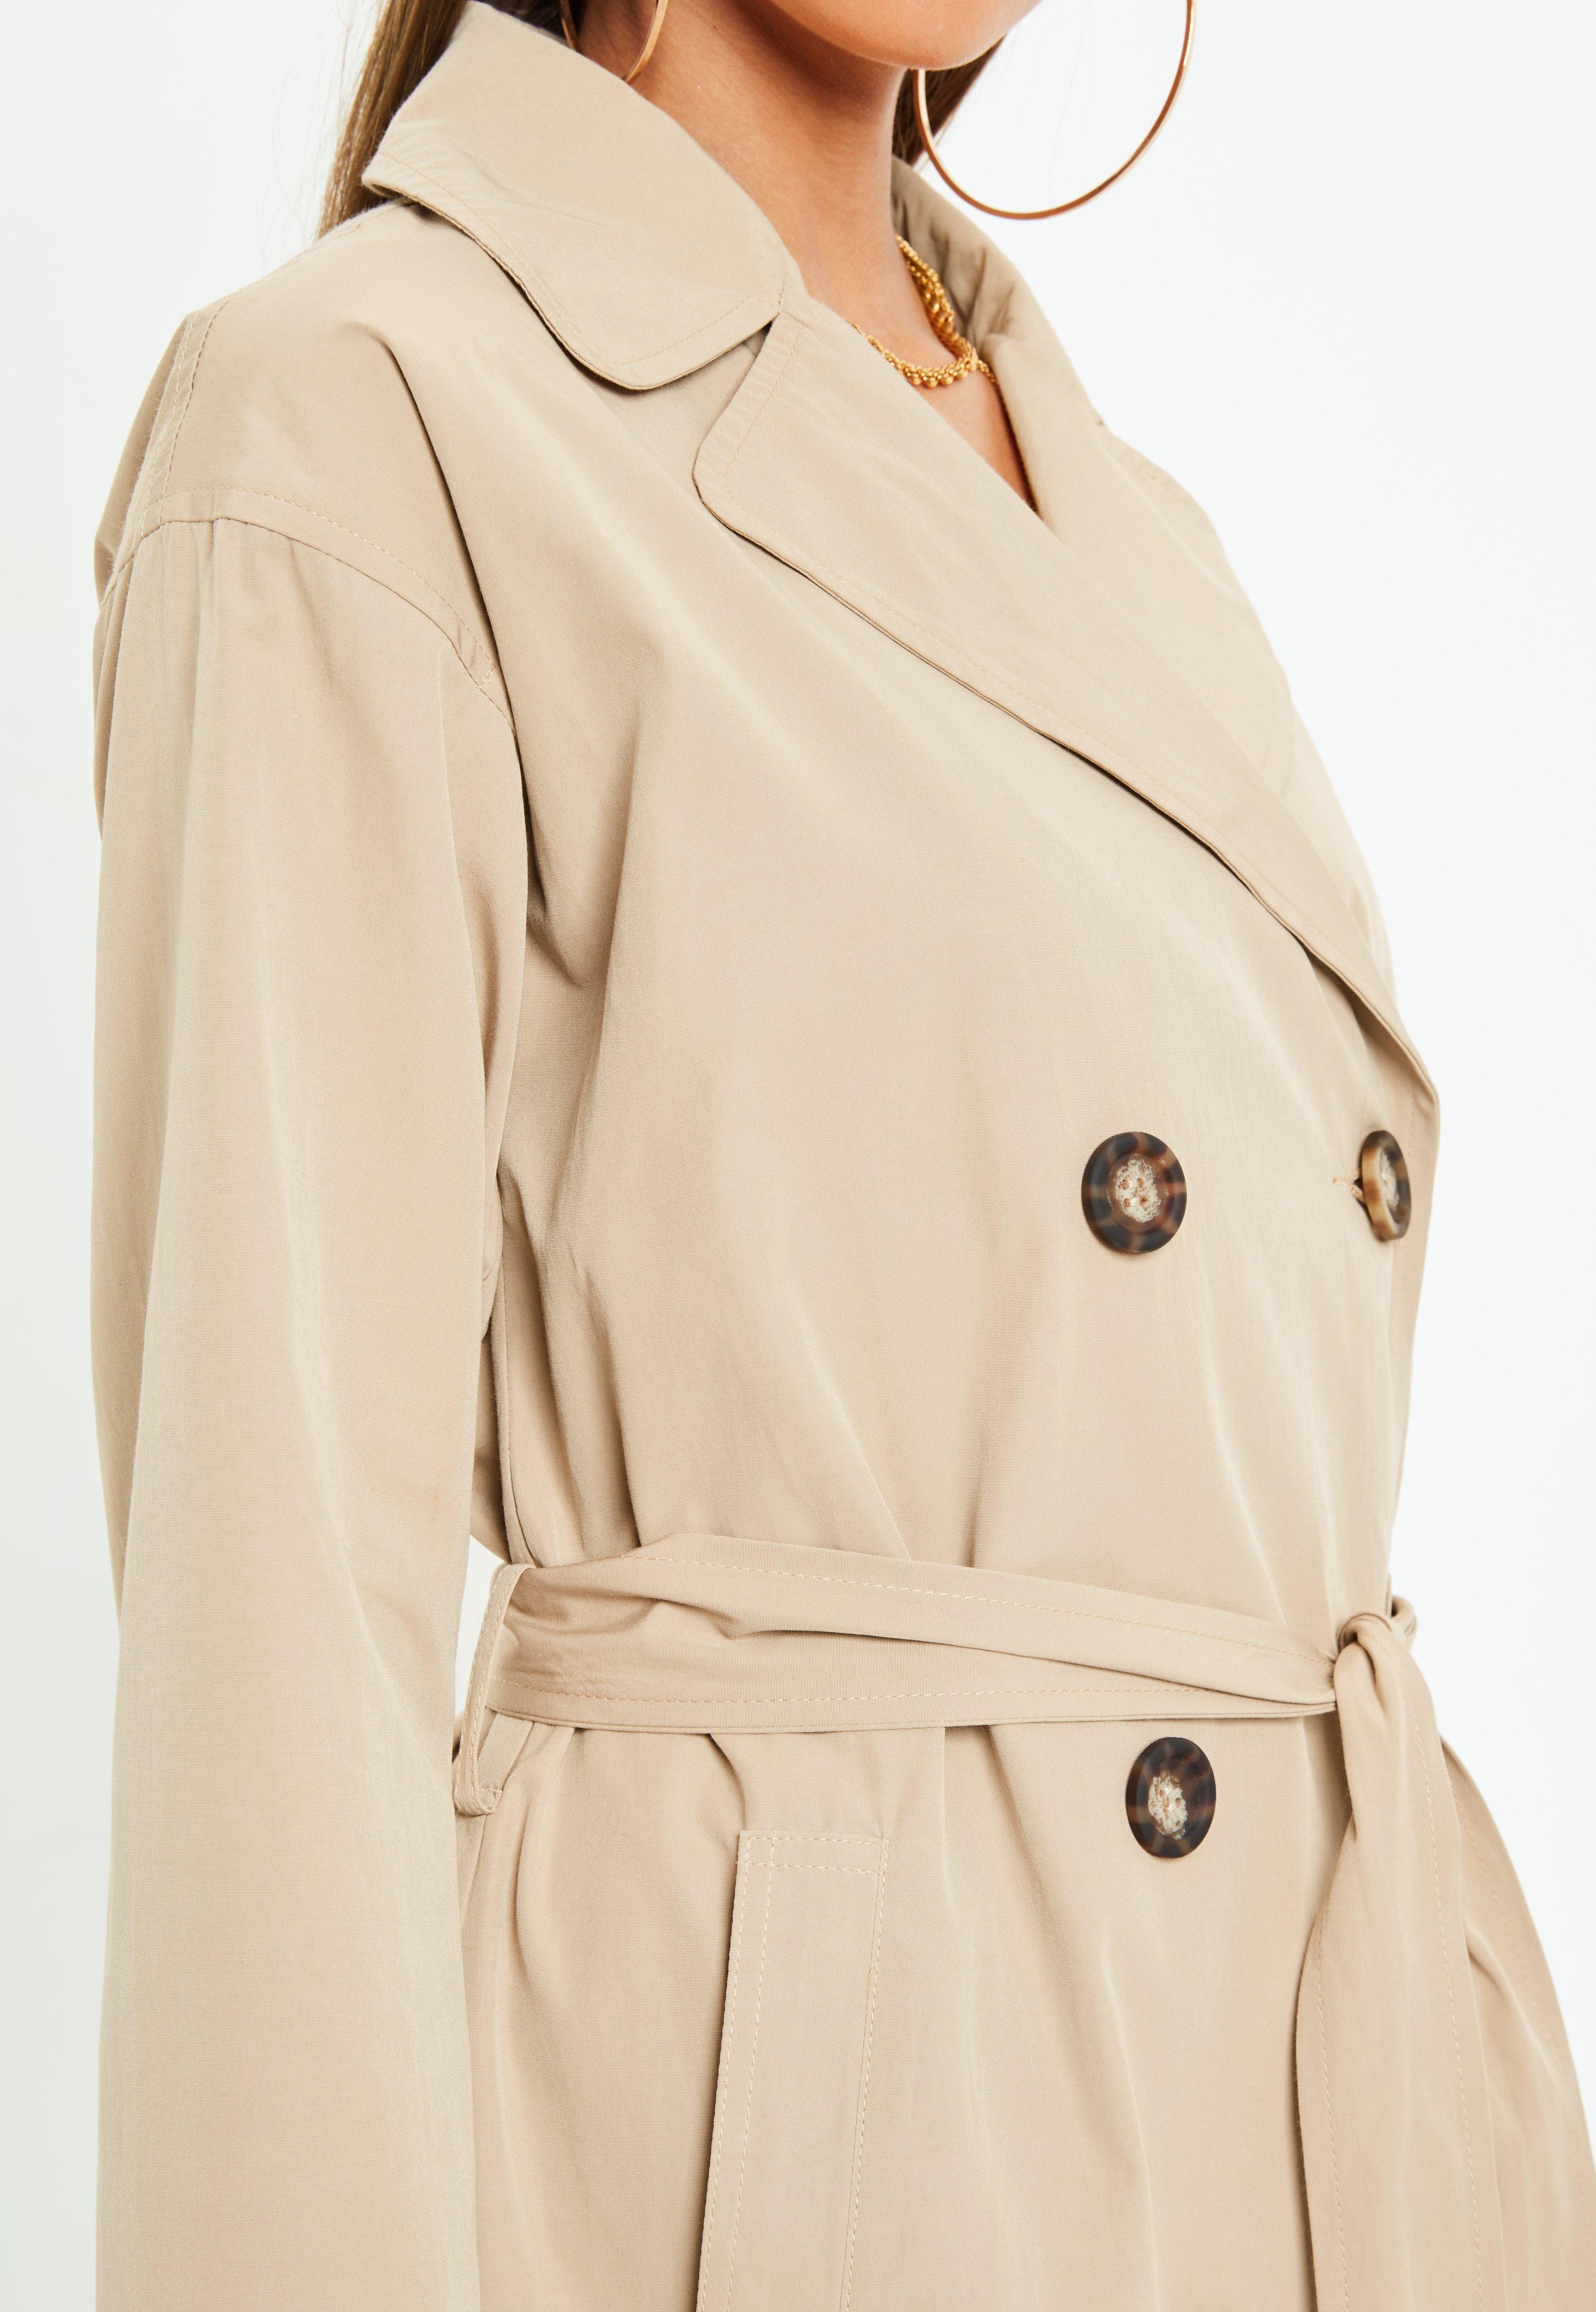 Lyst - Missguided Stone Classic A Line Belted Trench Coat in Natural